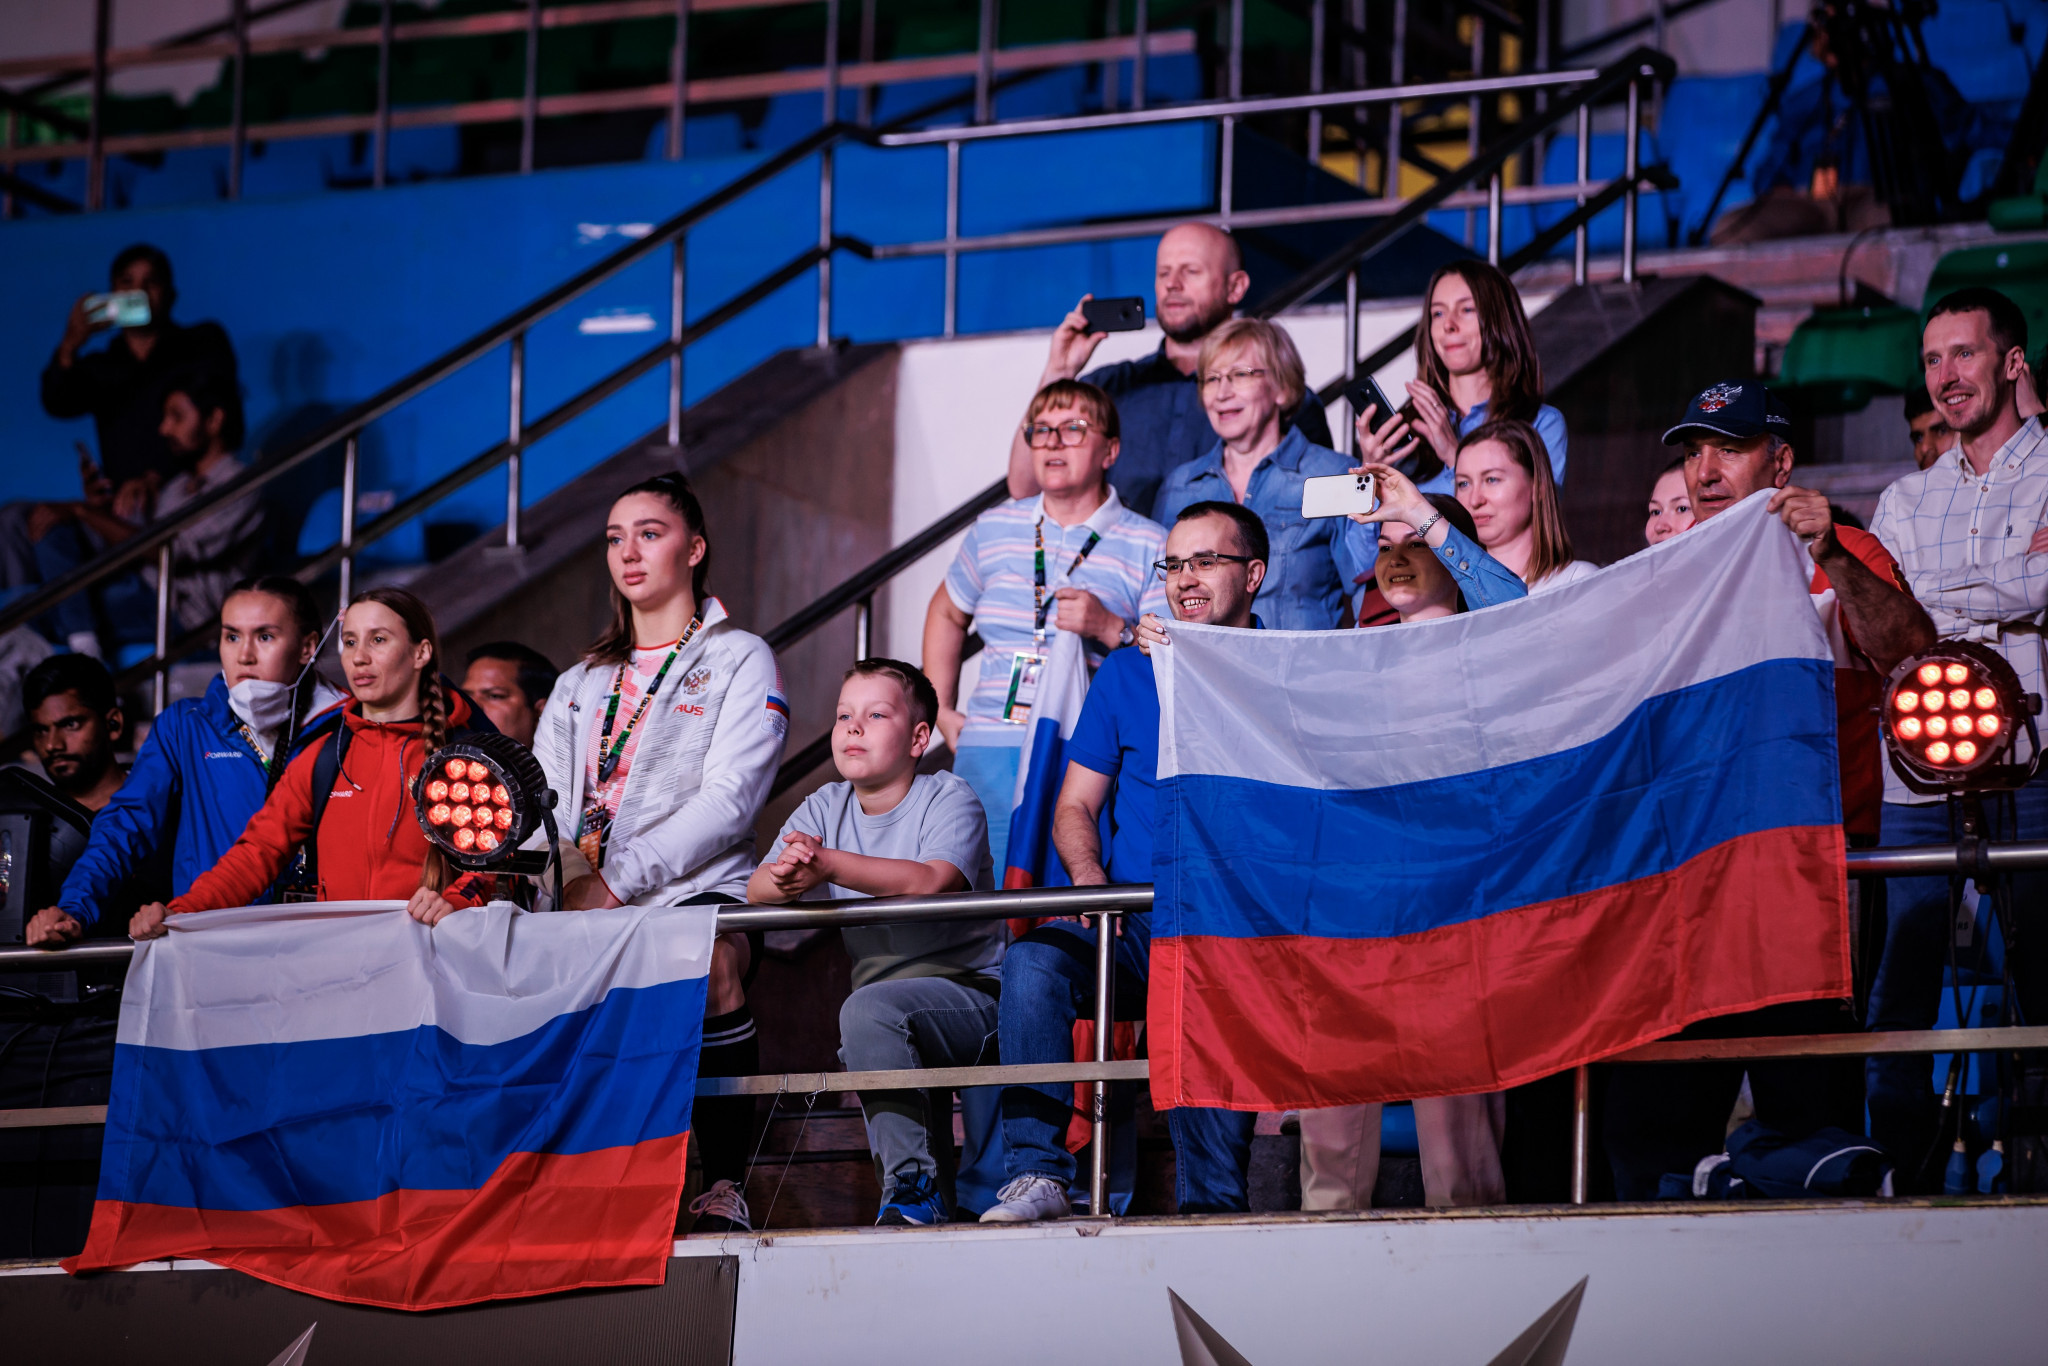 Russian fans have been displaying the country's flag whenever one of their boxers is competing in New Delhi ©IBA